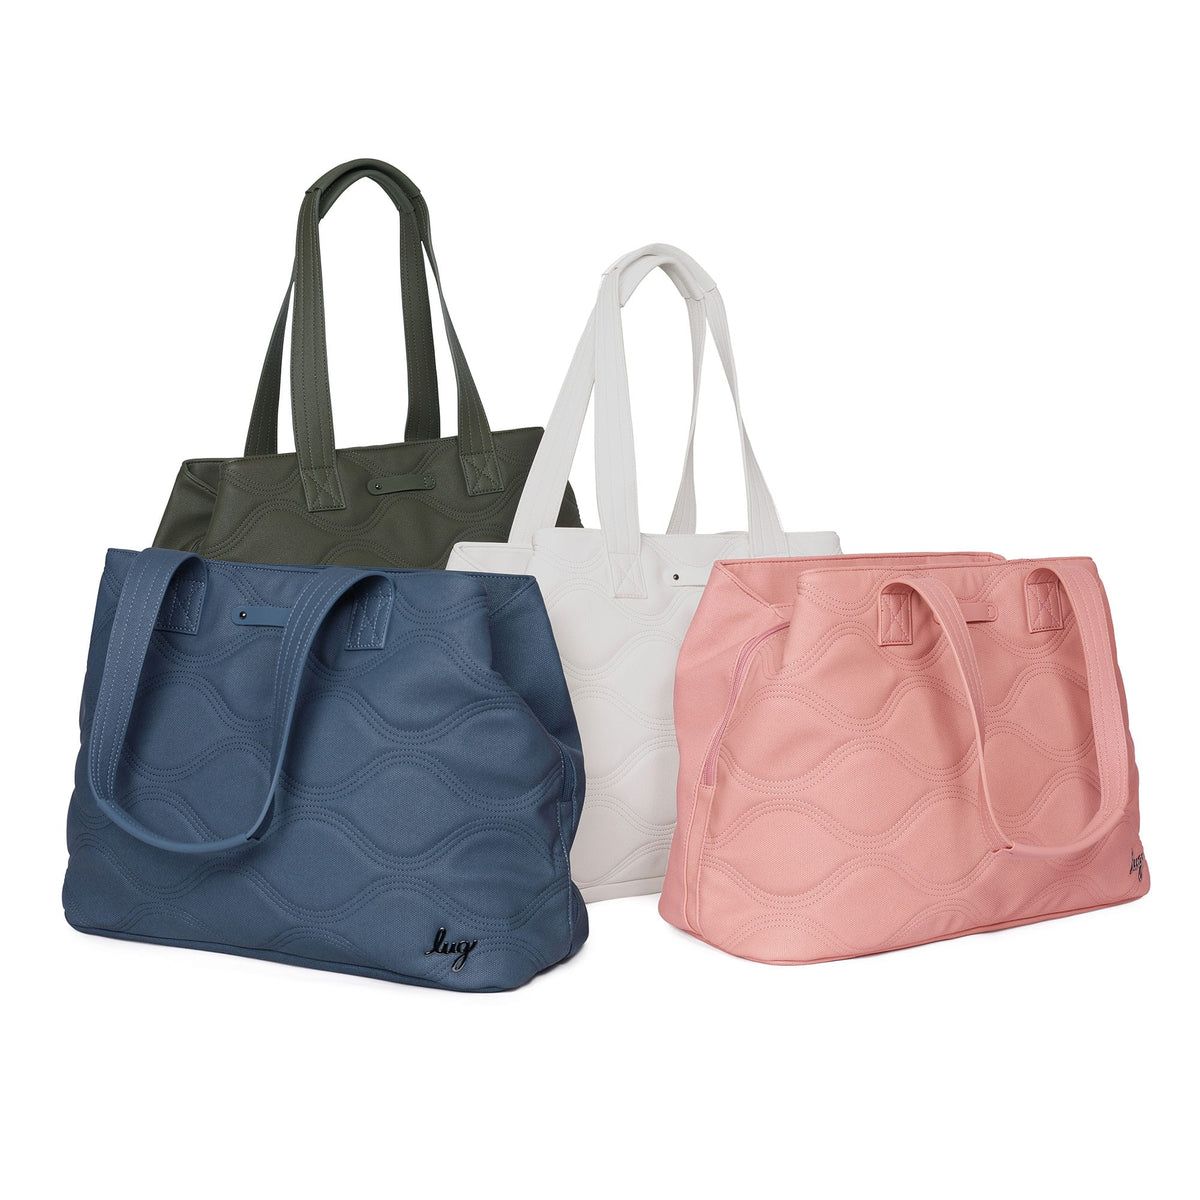  Lug - Alto Matte Luxe VL Convertible Tote Bag : Clothing, Shoes  & Jewelry